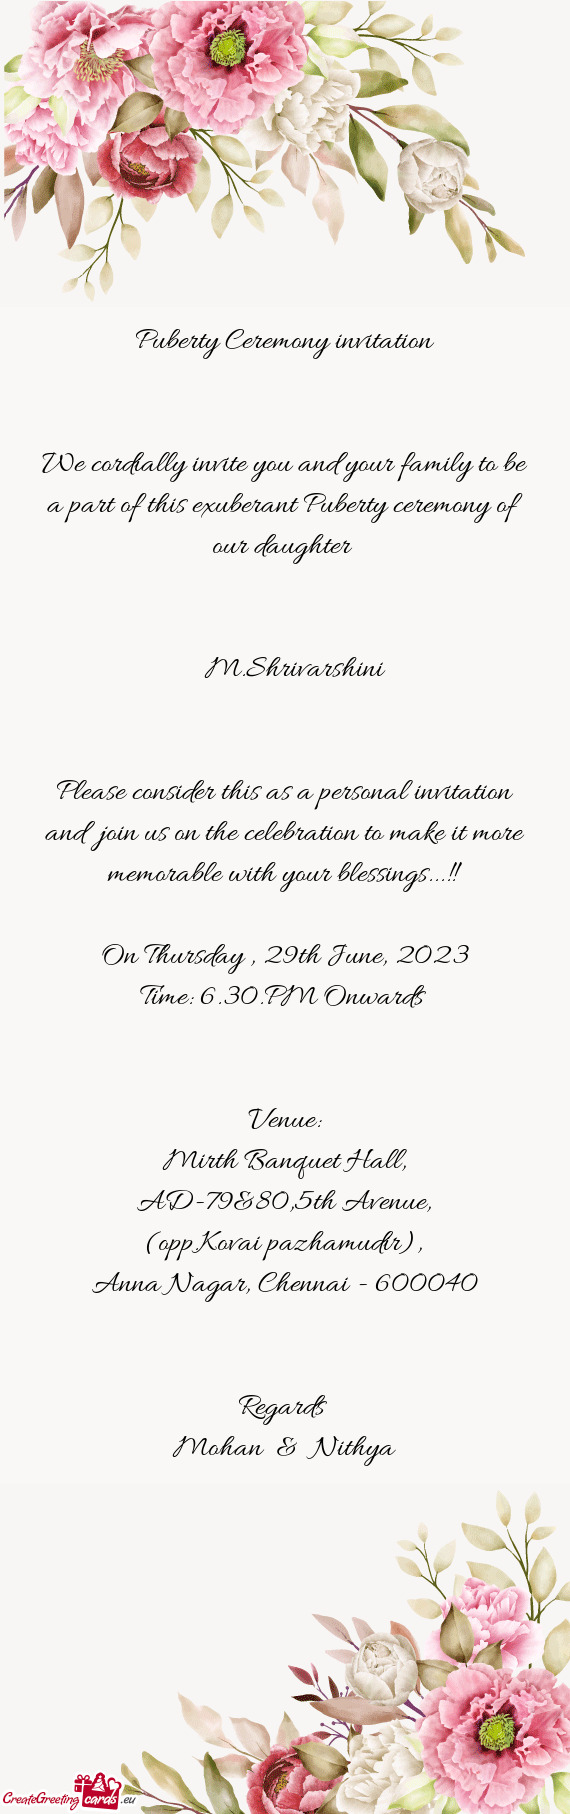 Please consider this as a personal invitation and join us on the celebration to make it more memora